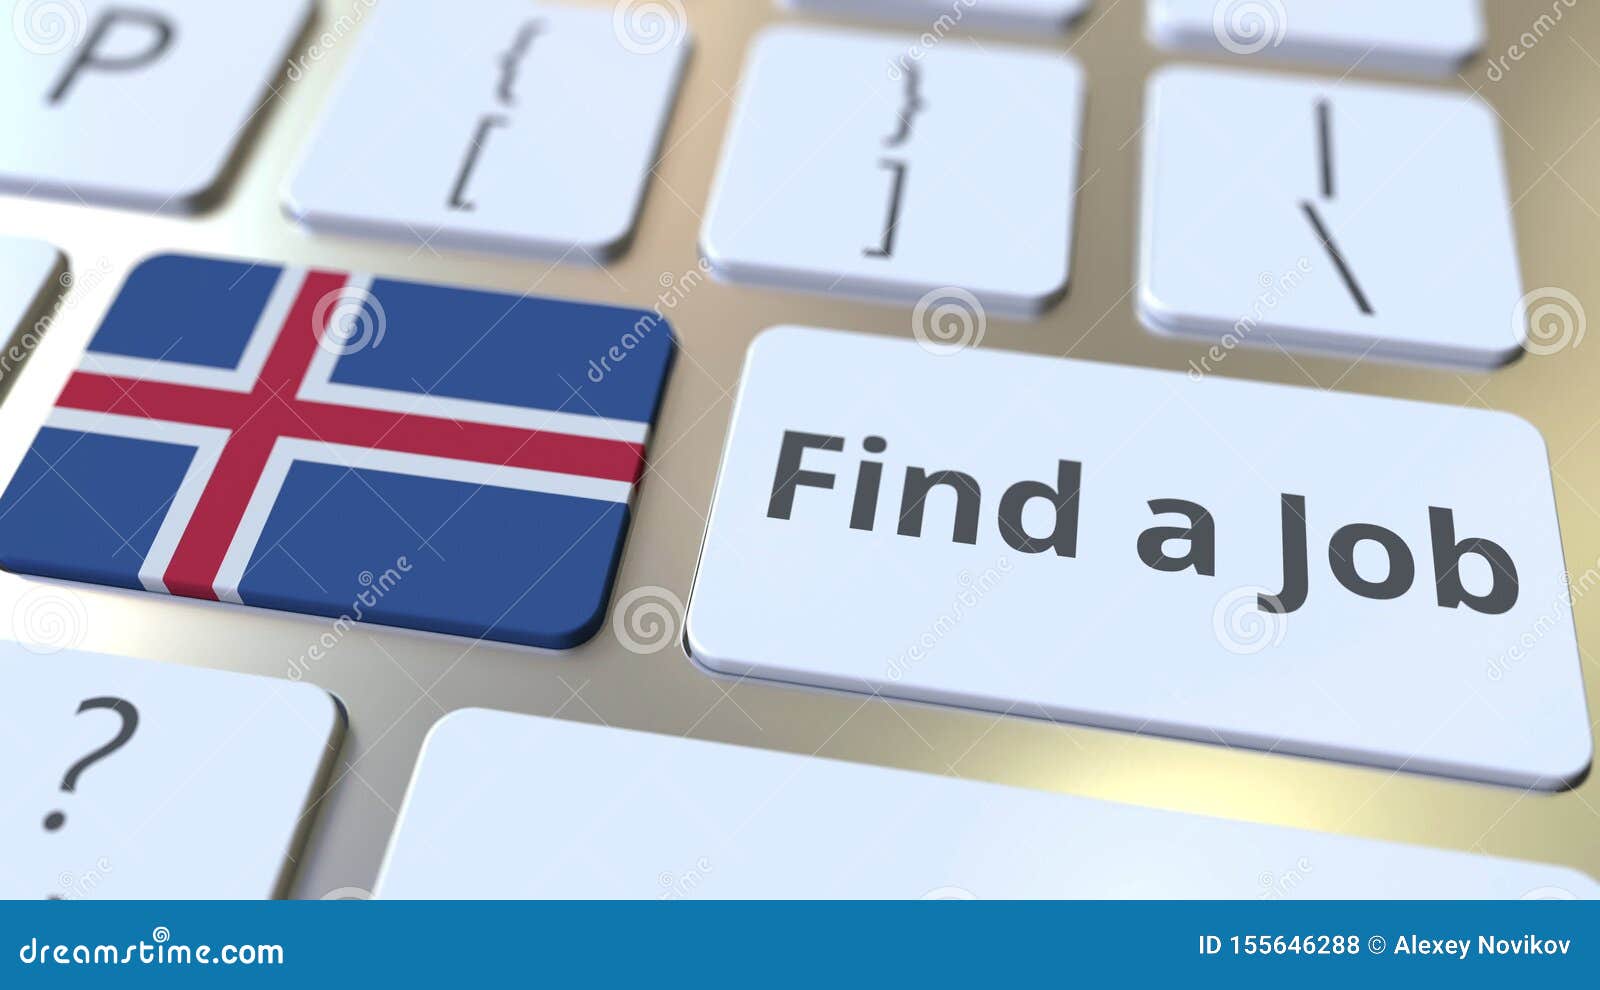 Find A Job Text And Flag Of Iceland On The Buttons On The Computer